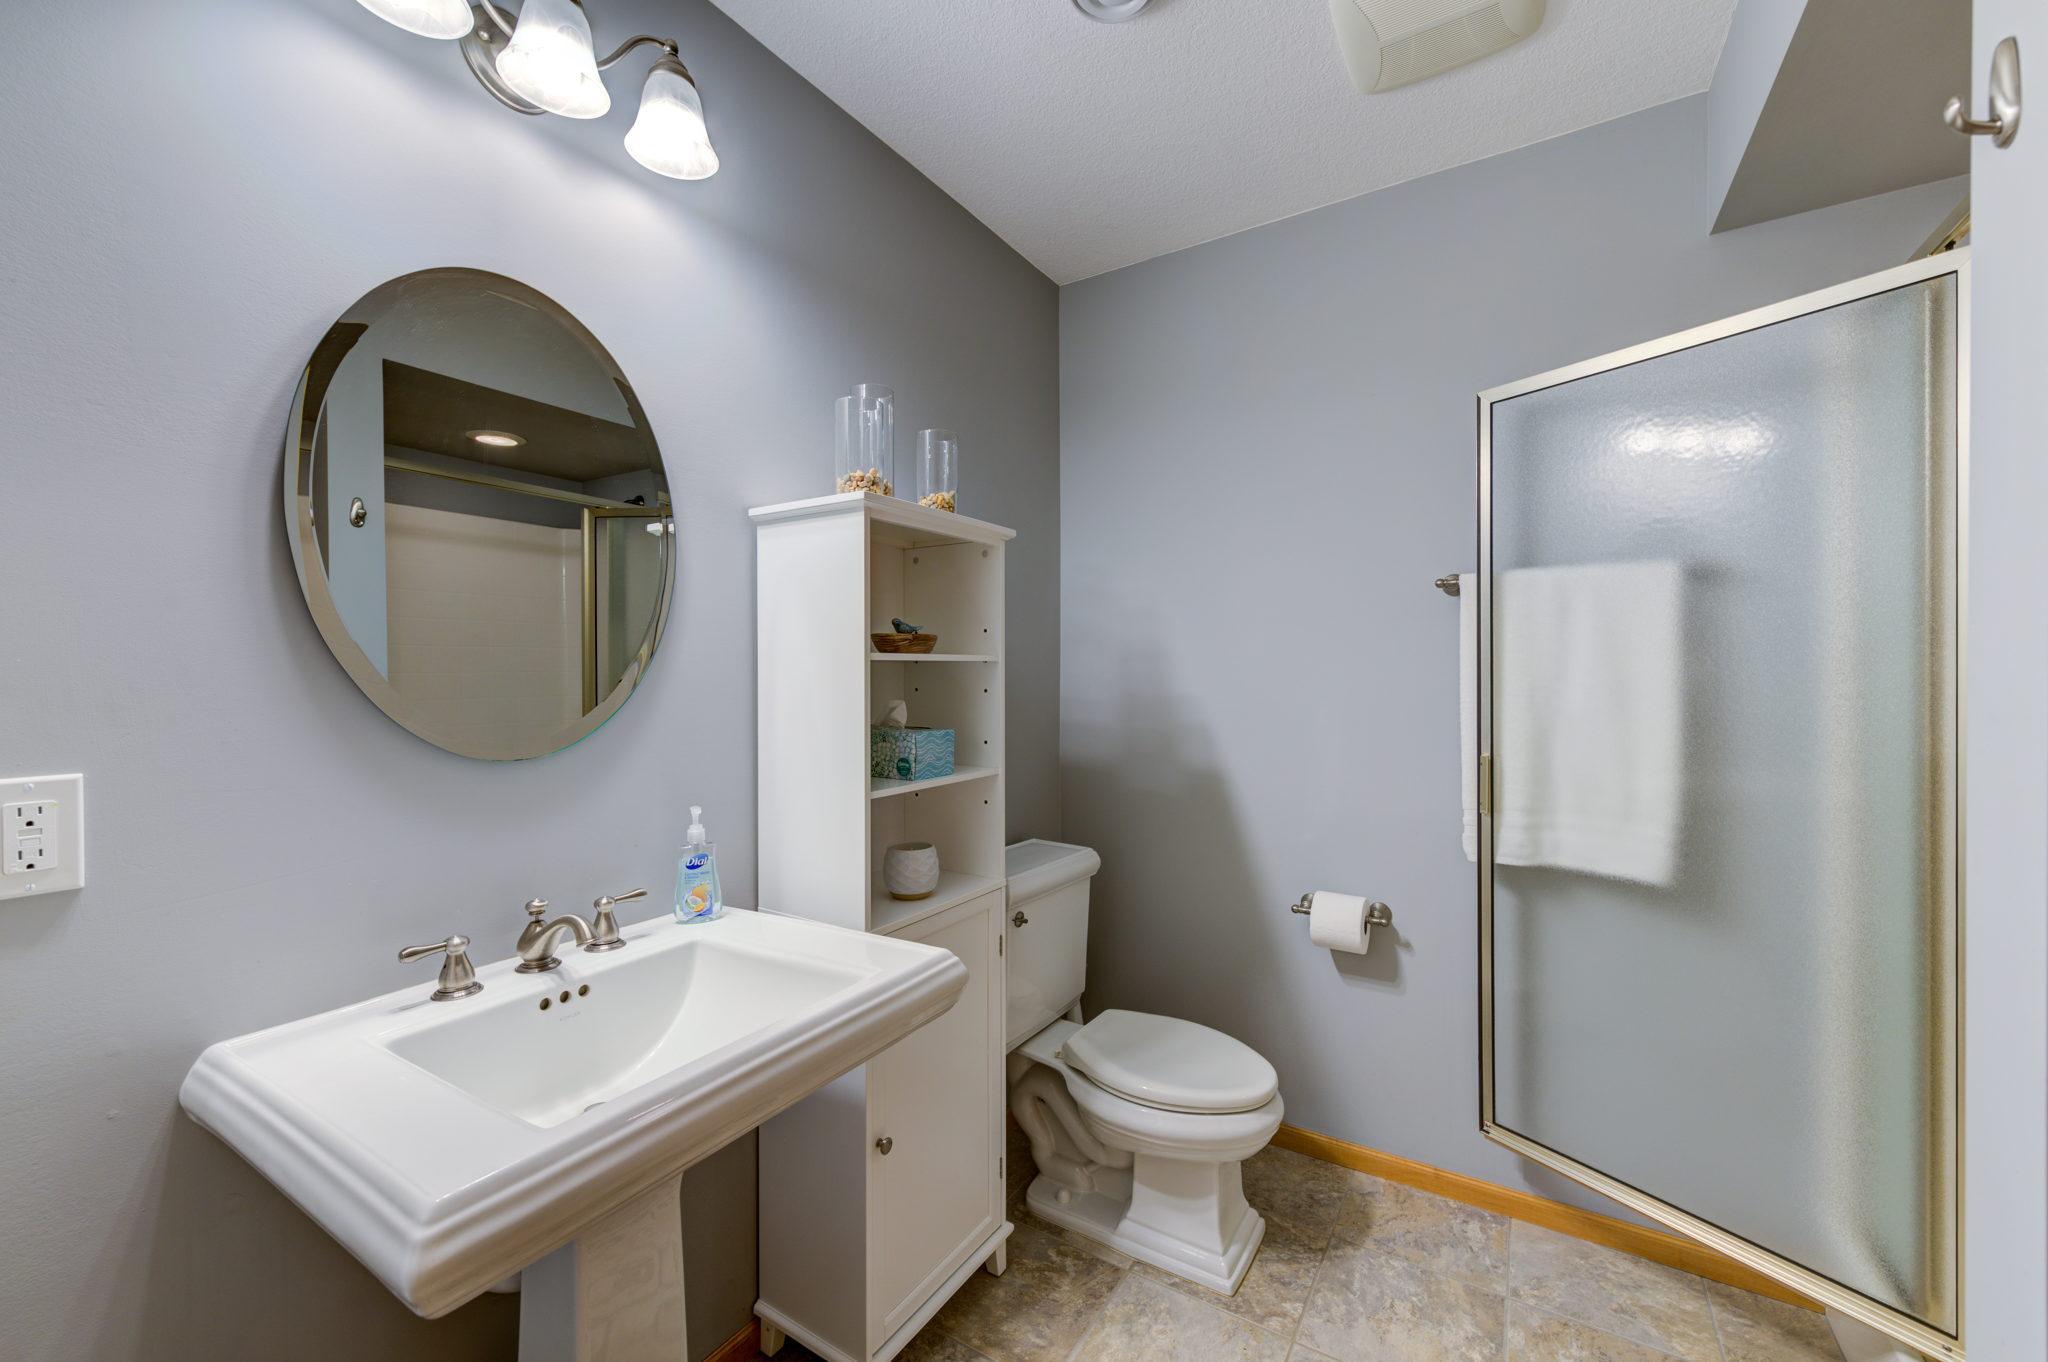 The lower level 3/4 bath offers a walk-in shower as well as a nice size linen closet.